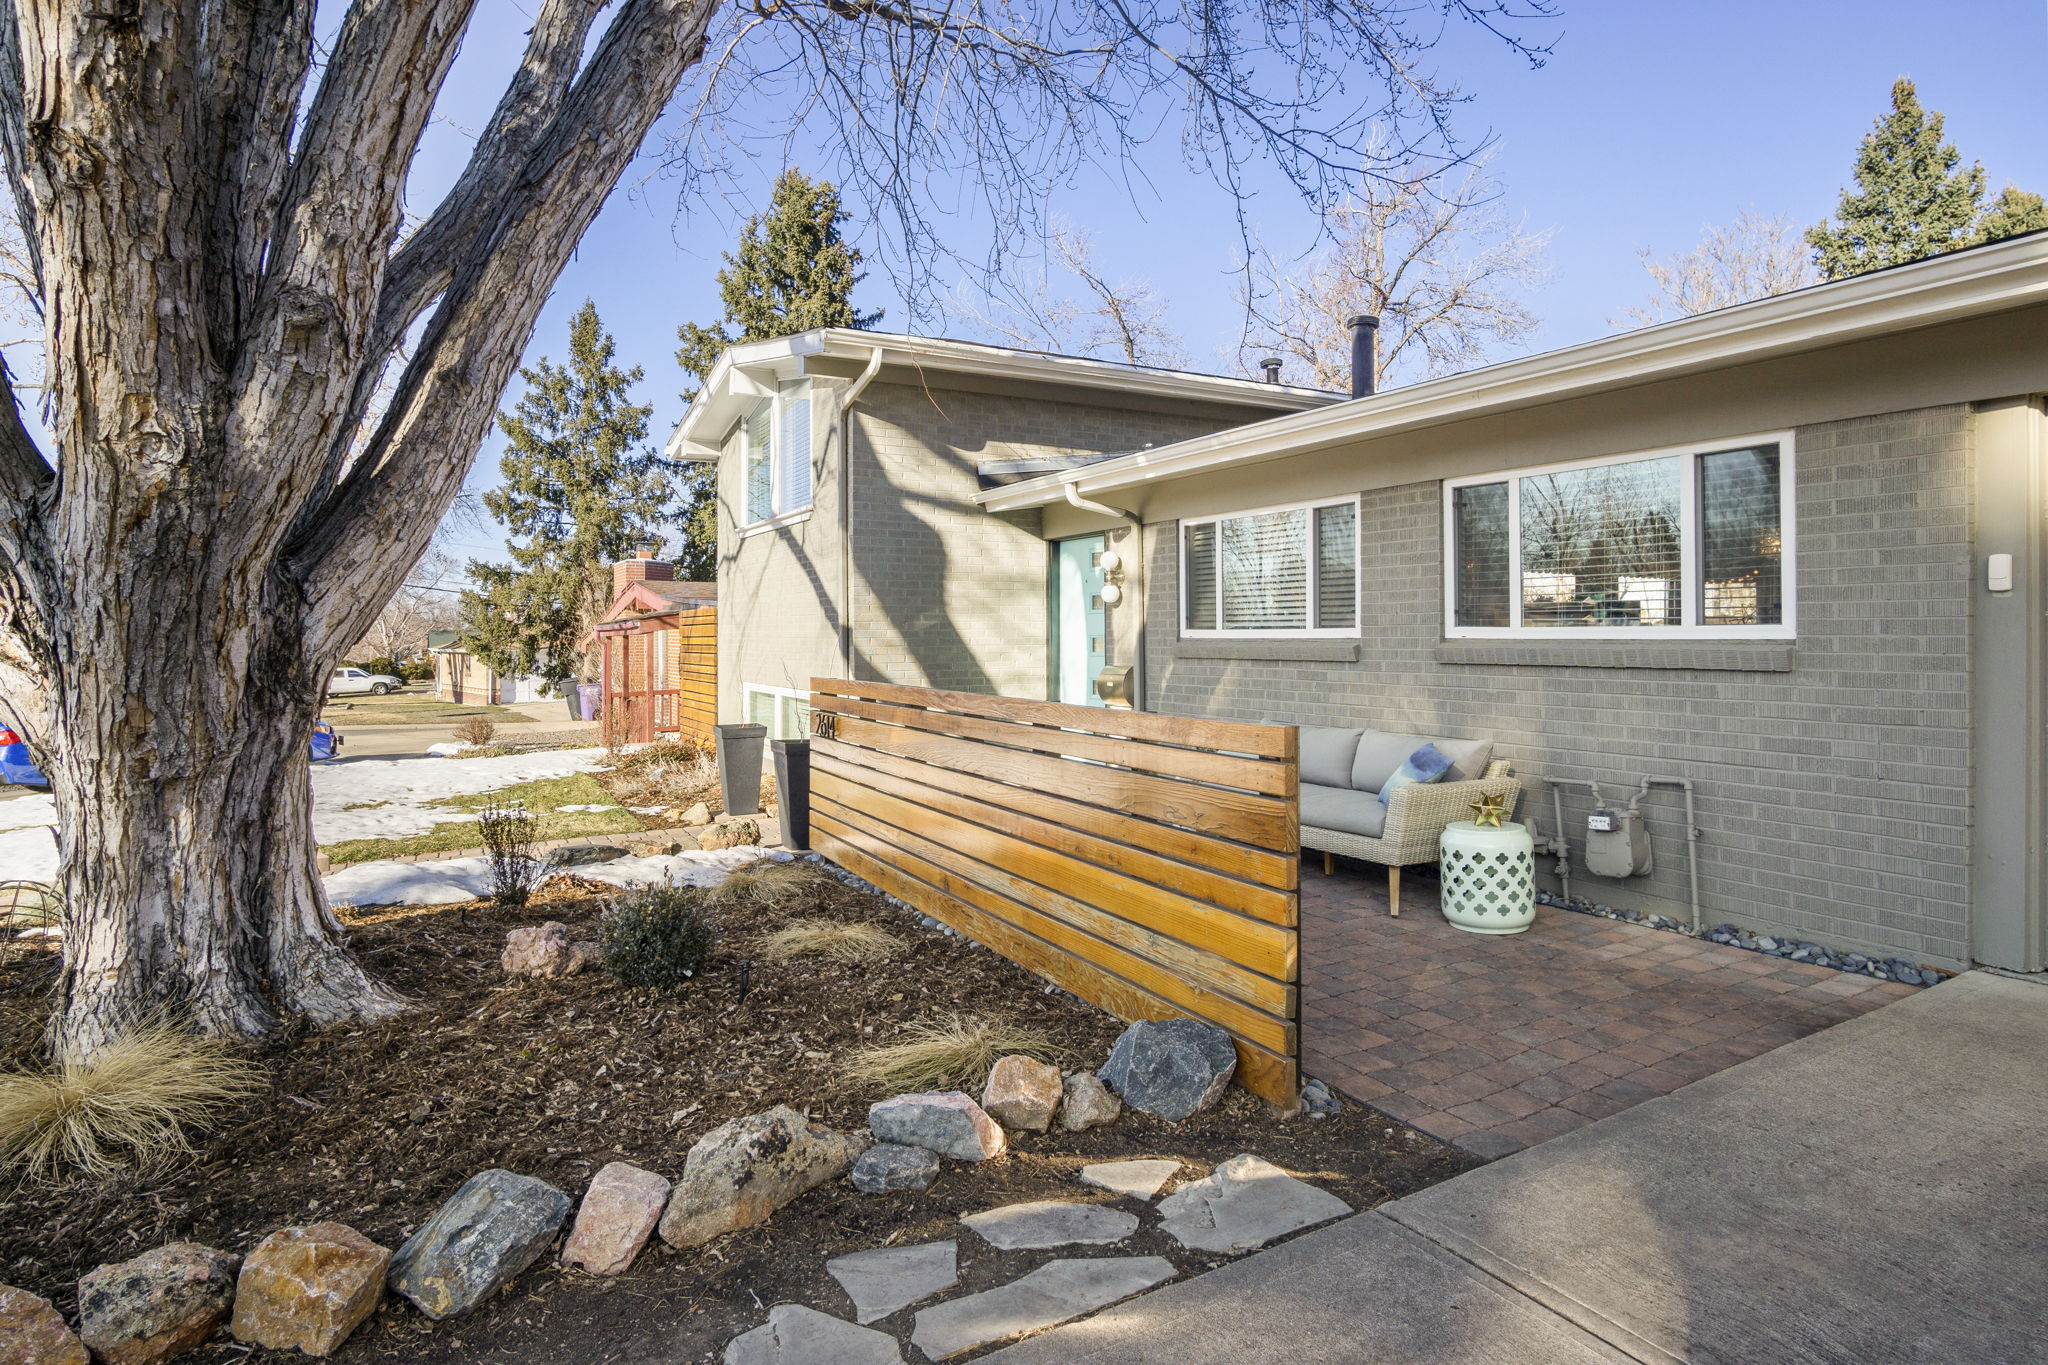  2614 S Raleigh St, Denver, CO 80219, US Photo 35